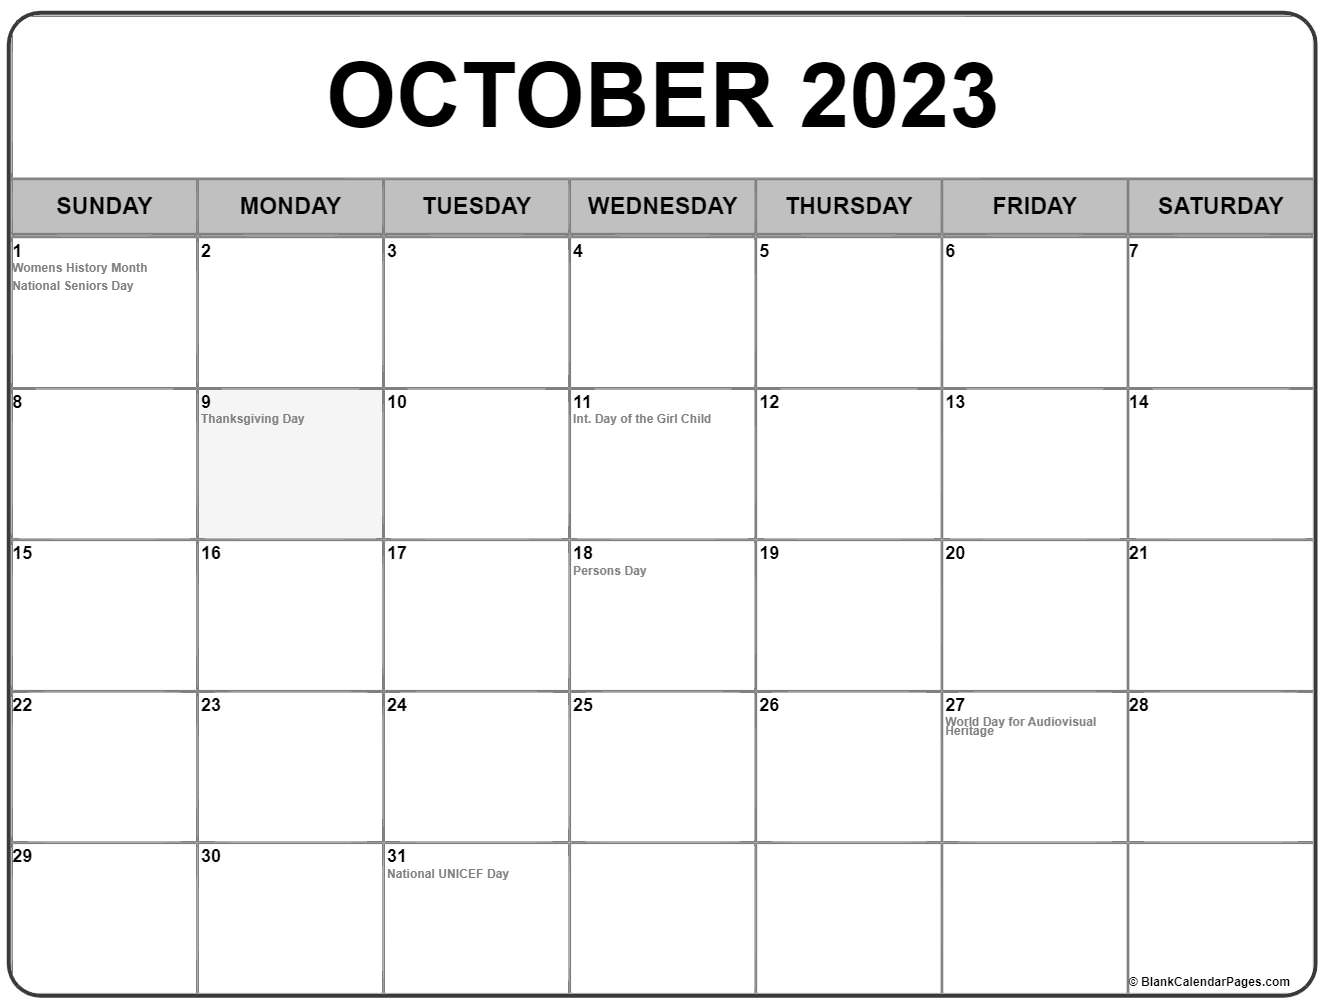 october-2023-canada-calendar-with-holidays-for-printing-image-format